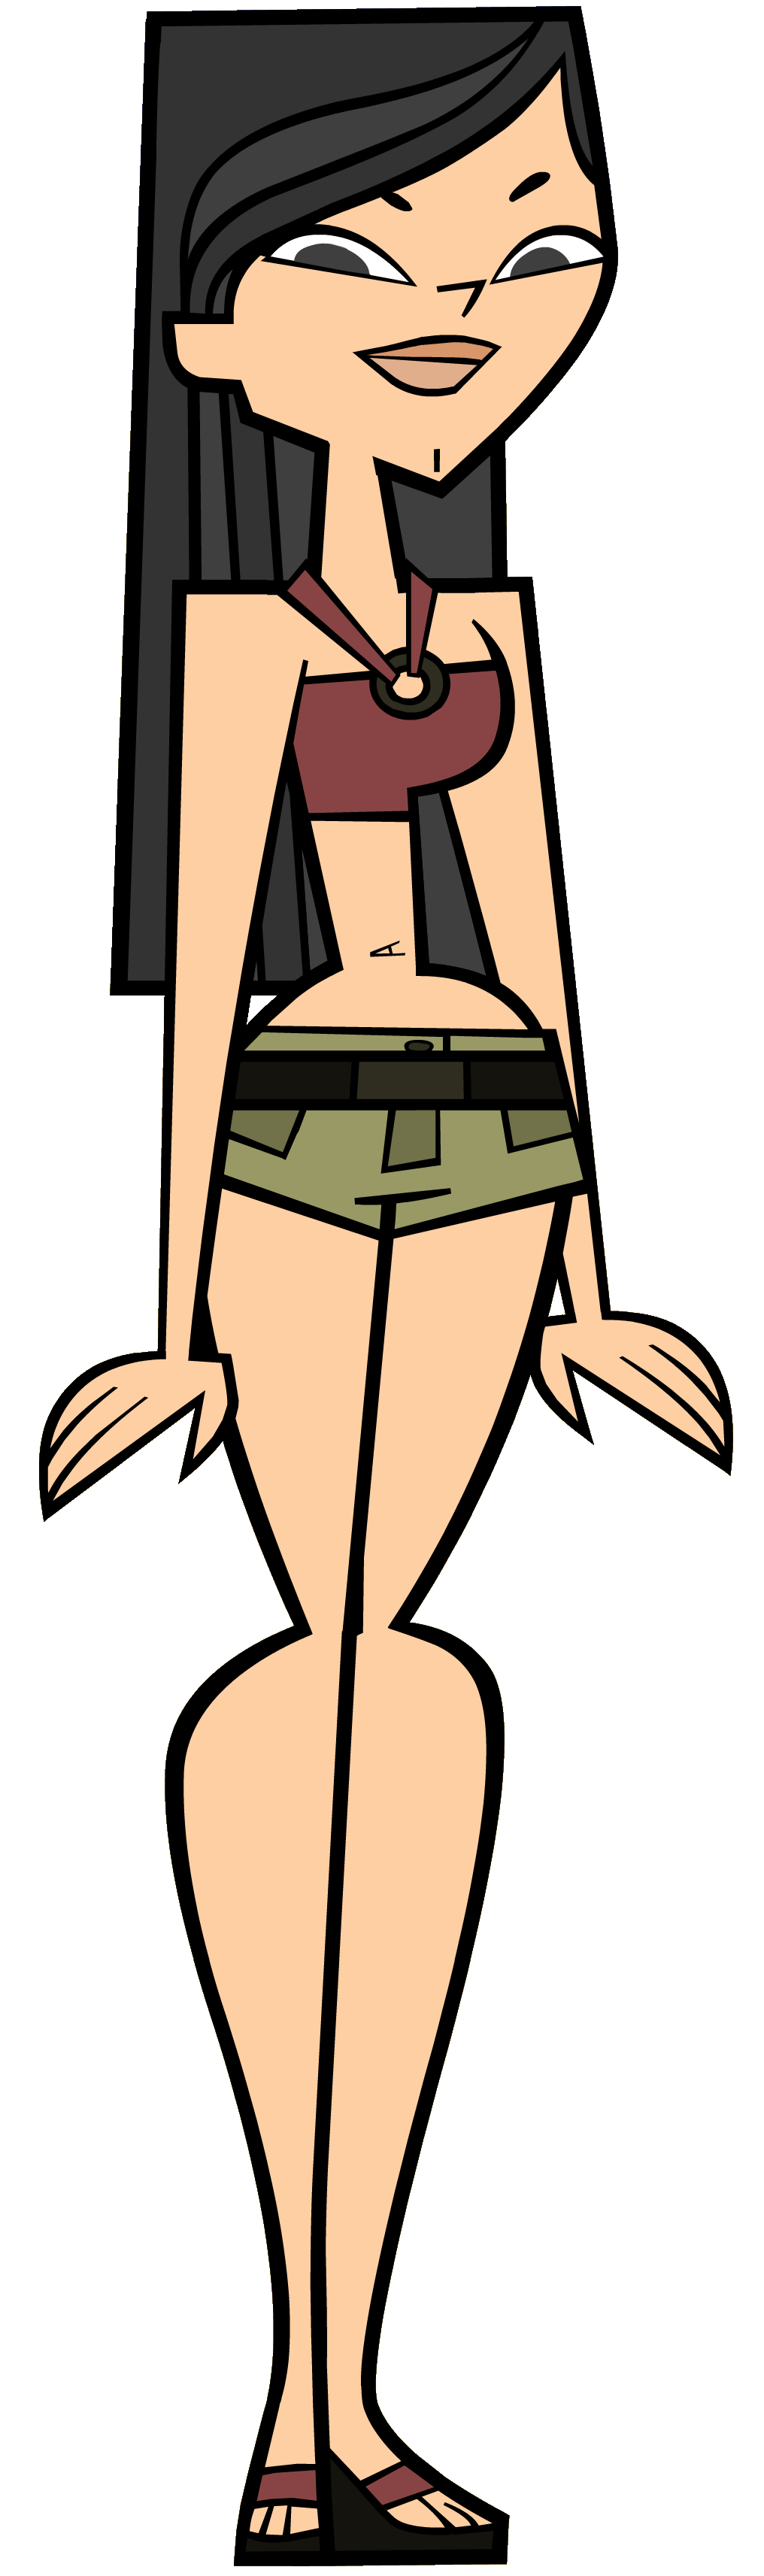 Total Drama Wiki interview with Annick Obonsawin (voice of Sierra) 